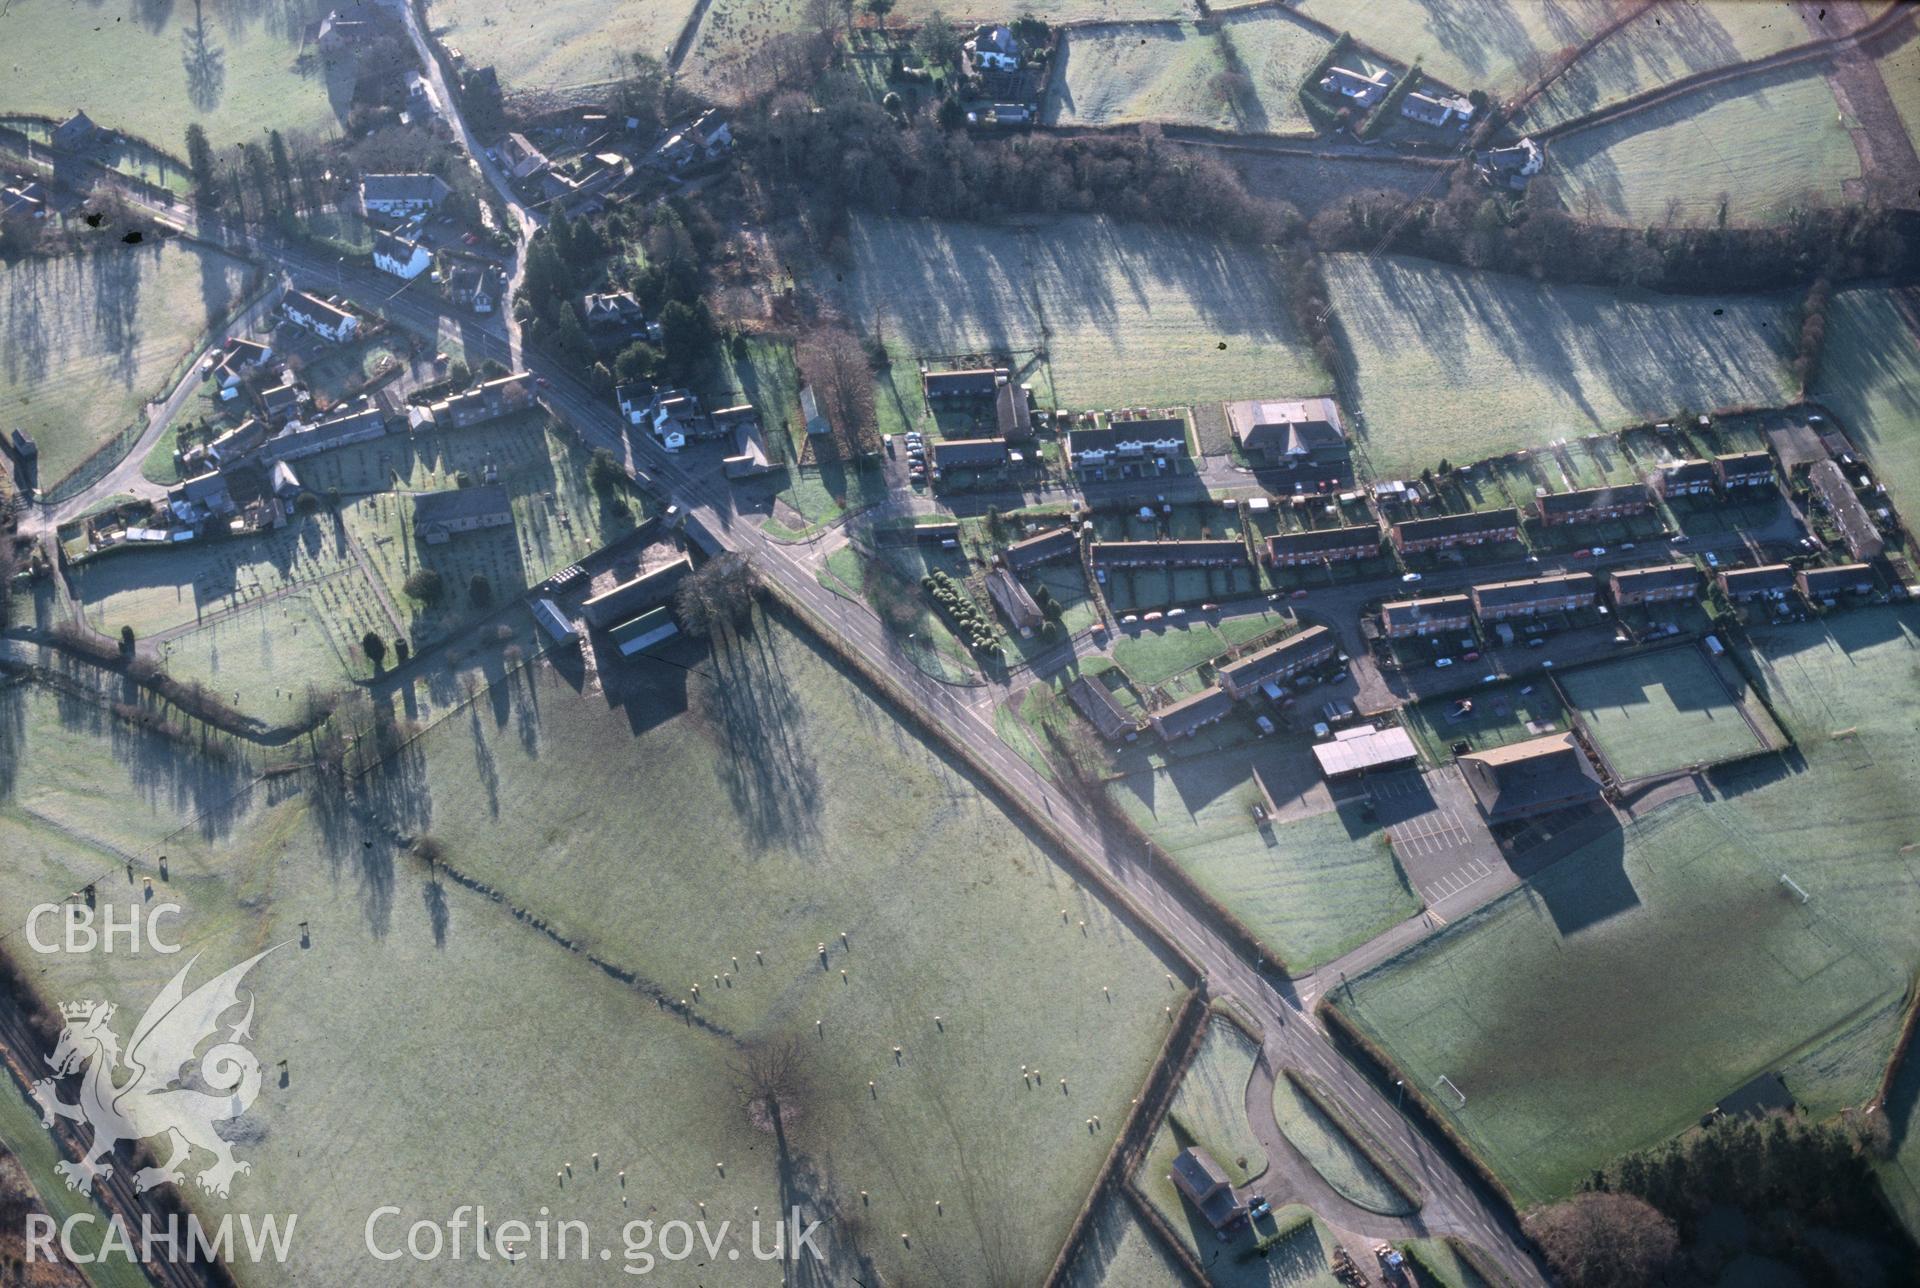 Slide of RCAHMW colour oblique aerial photograph of Carno, taken by C.R. Musson, 20/12/1998.